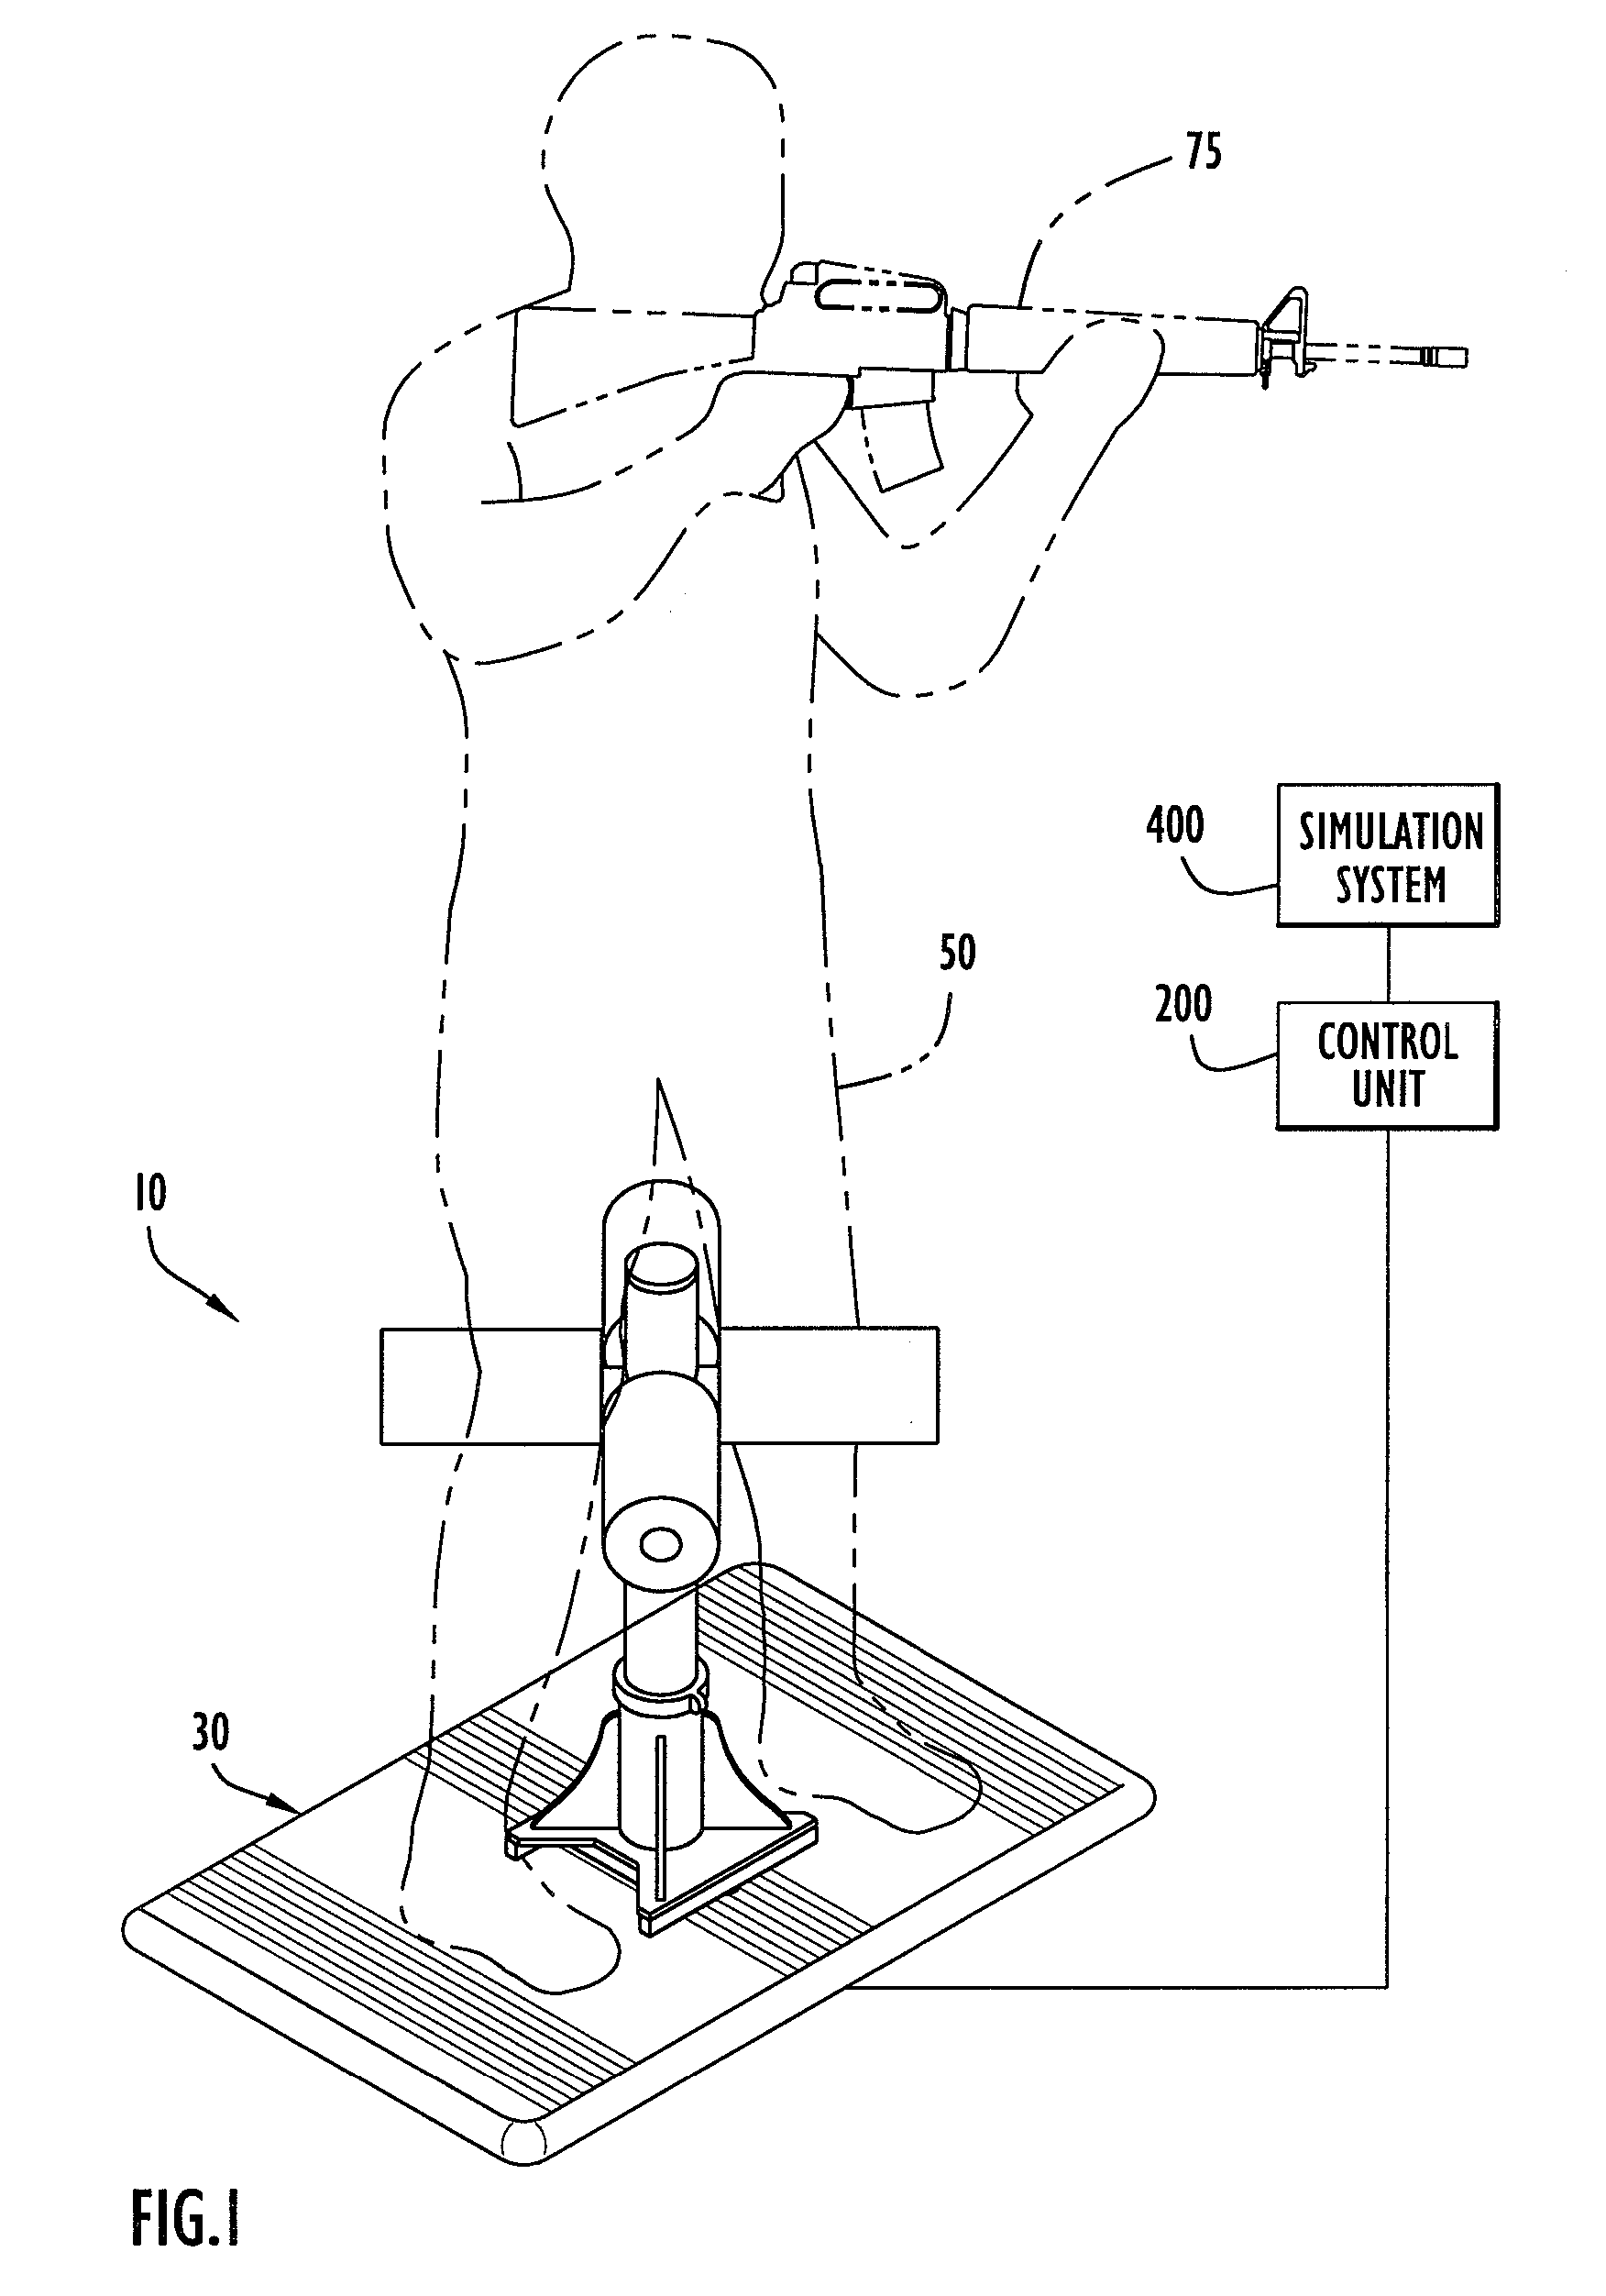 Method and Apparatus for Operatively Controlling a Virtual Reality Scenario with an Isometric Exercise System